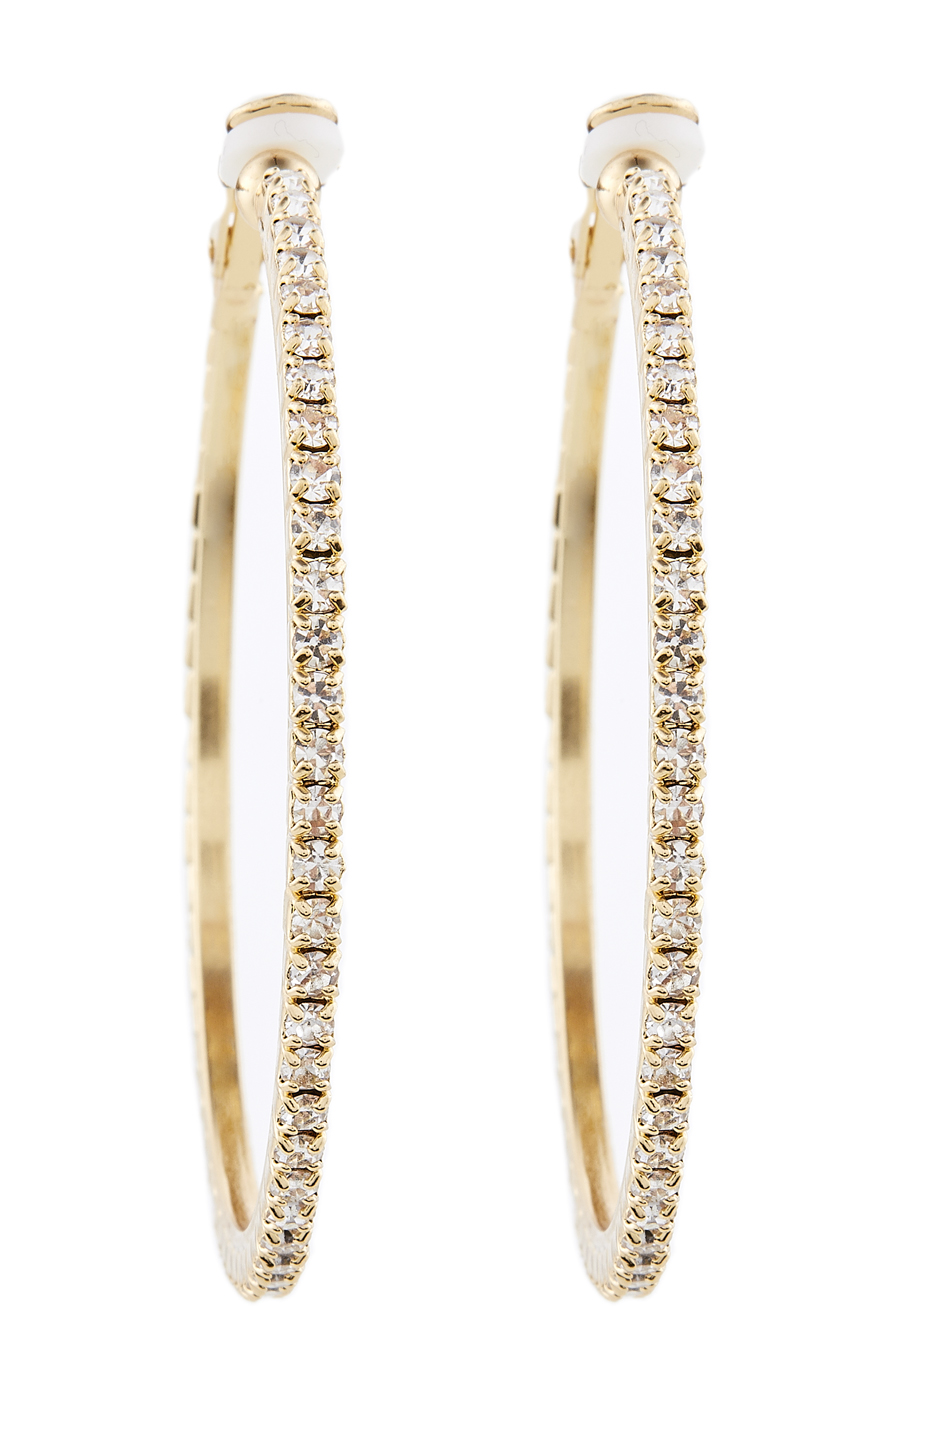 Clip On Earrings - Karina G - gold hoops with clear crystals